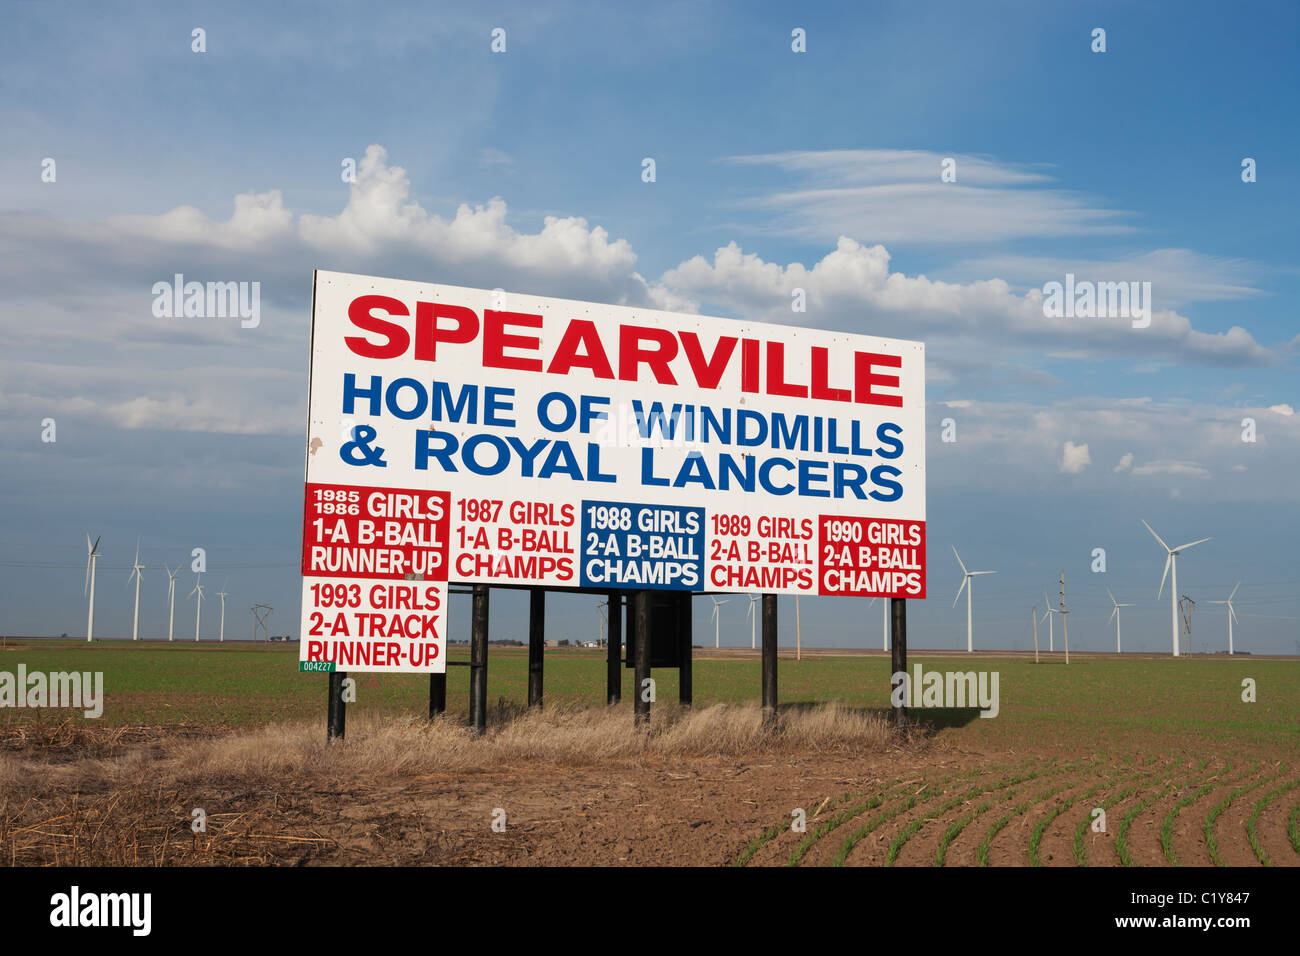 A billboard in Spearville, Kansas proudly recognizing high school sports teams. Stock Photo